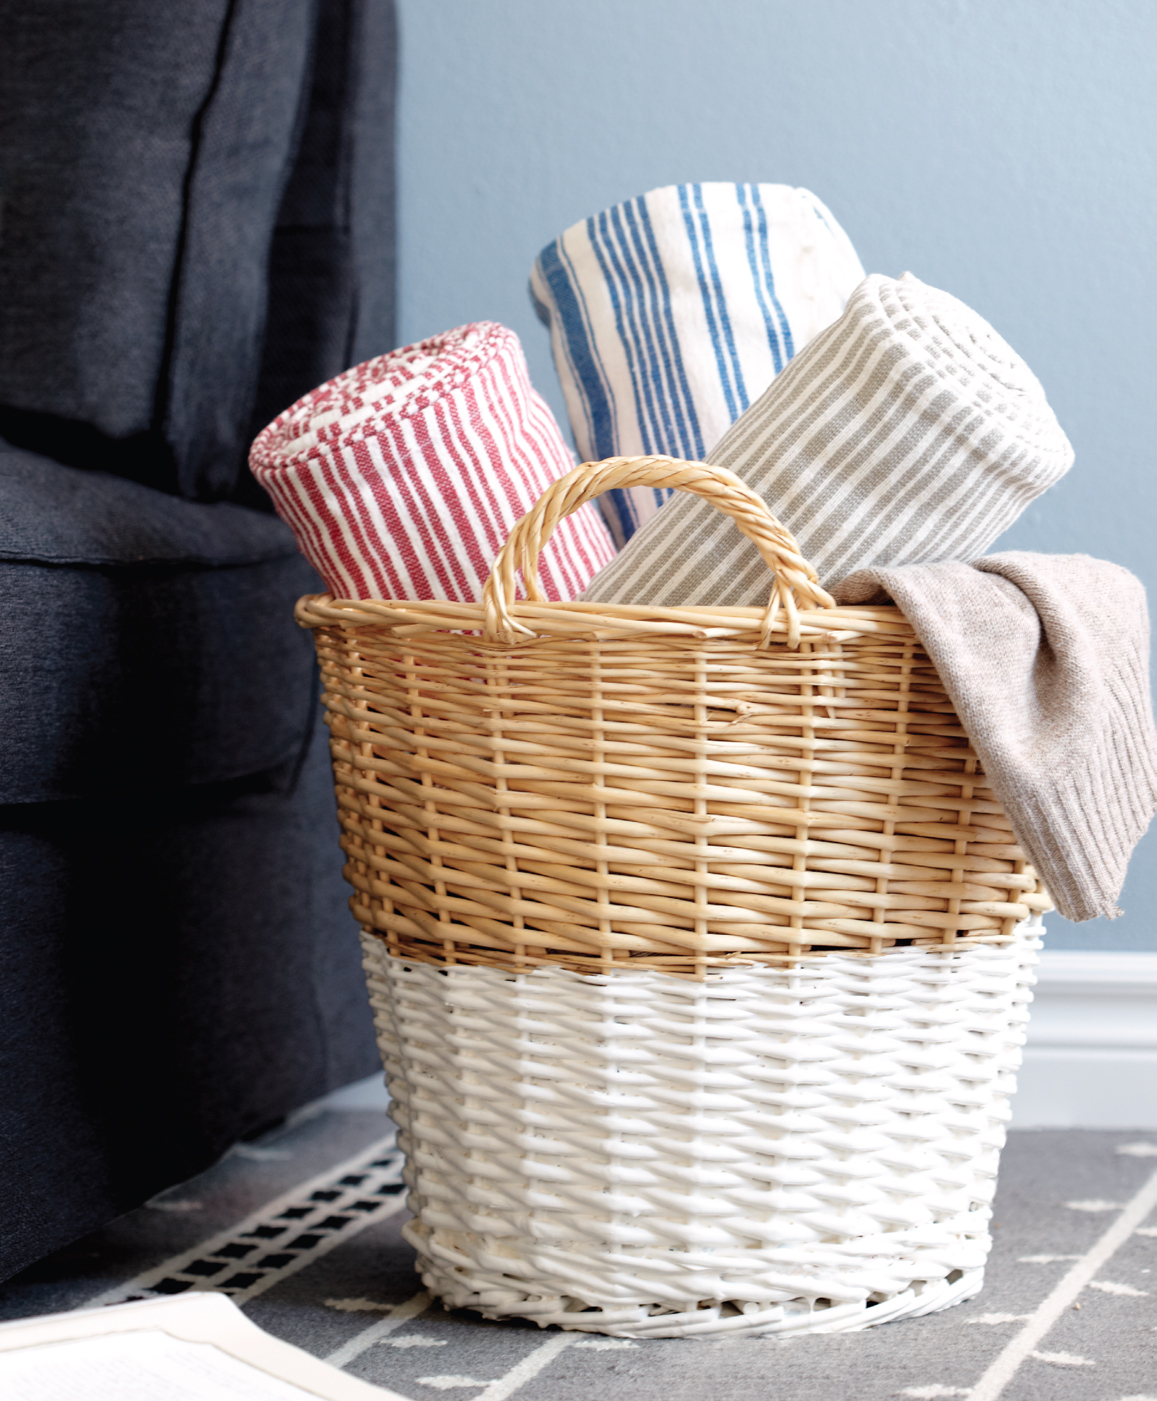 Laundry basket dipped in white paint